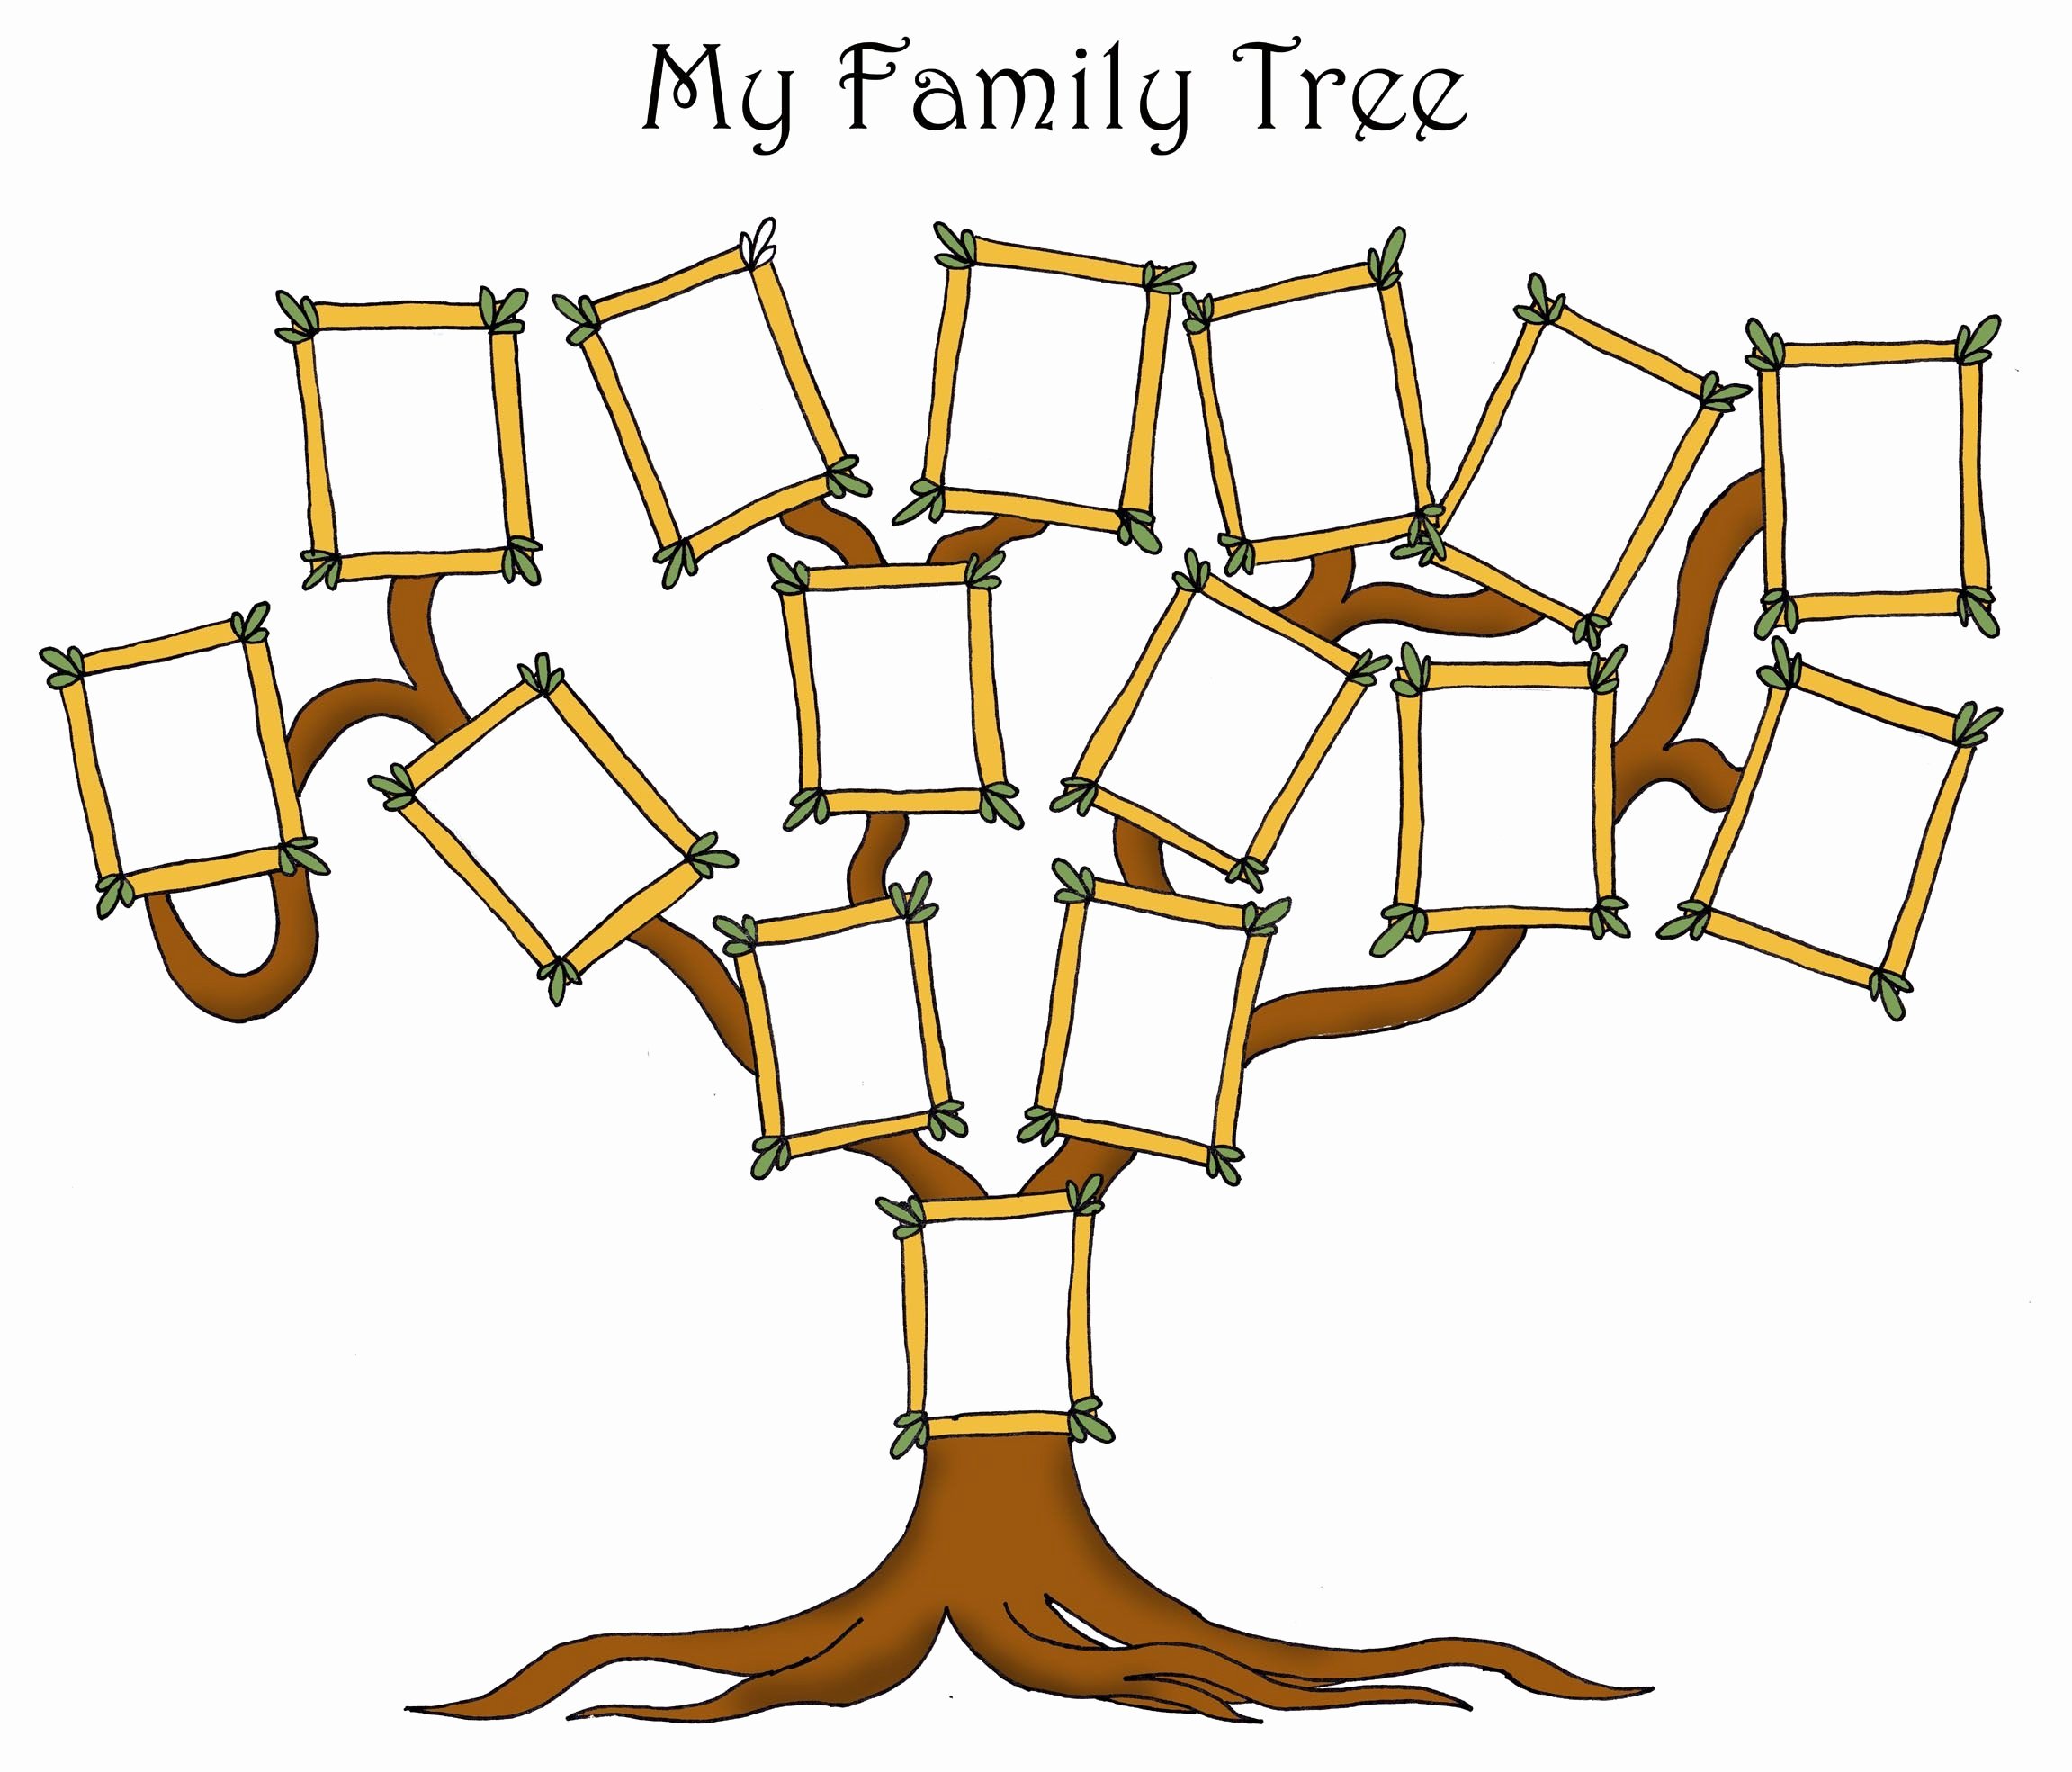 Free Family Tree Templates Best Of Free Editable Family Tree Template Daily Roabox